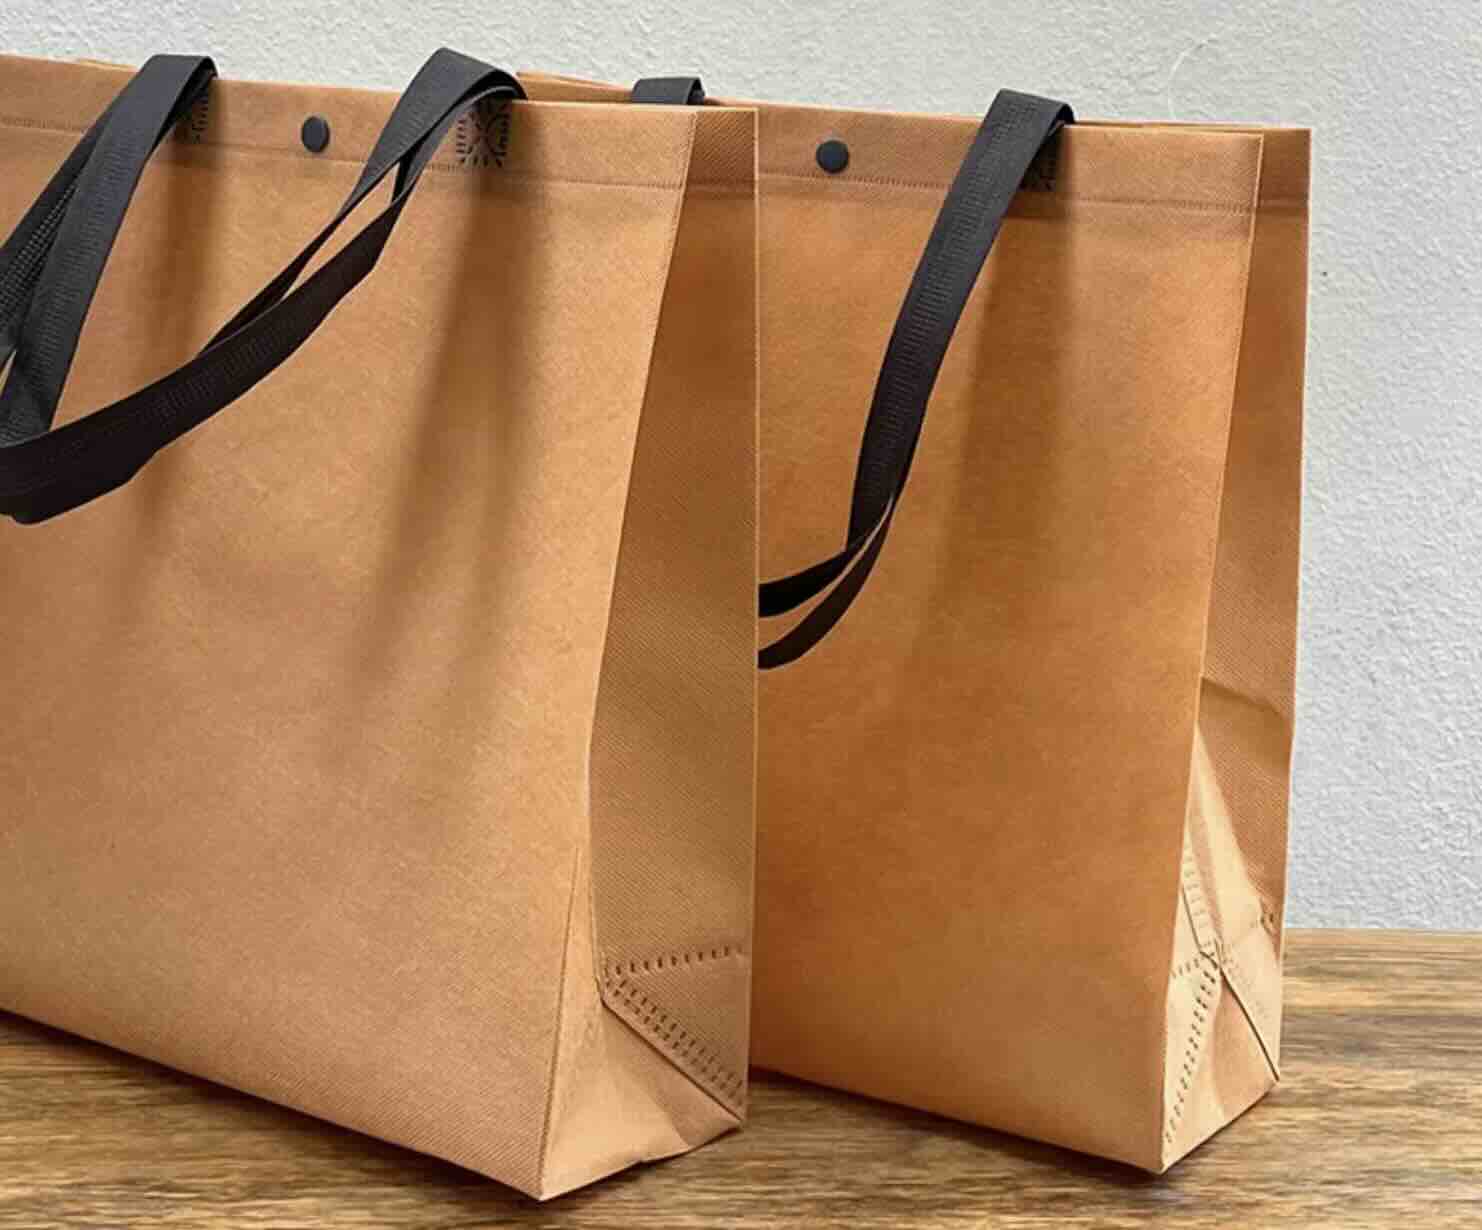 Recyclable and Re-usable Shopping bags